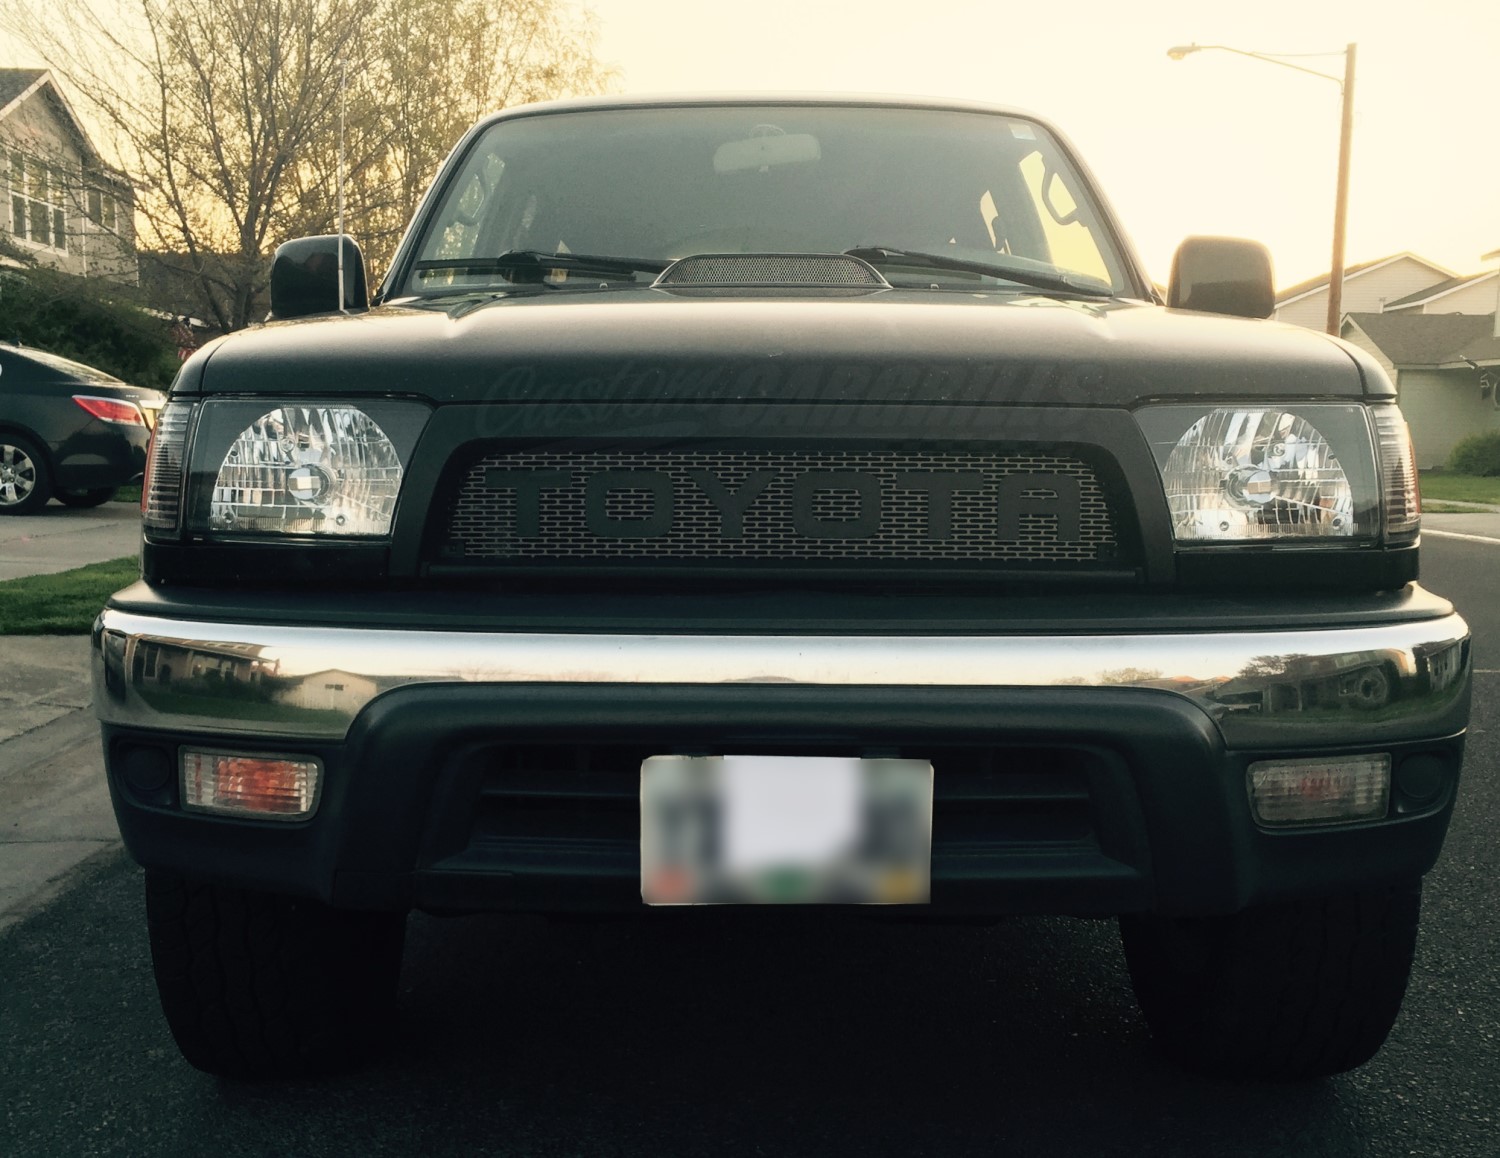 2002 Toyota Tacoma Grill ~ Best Toyota 2002 Toyota Tacoma Front Bumper And Grill